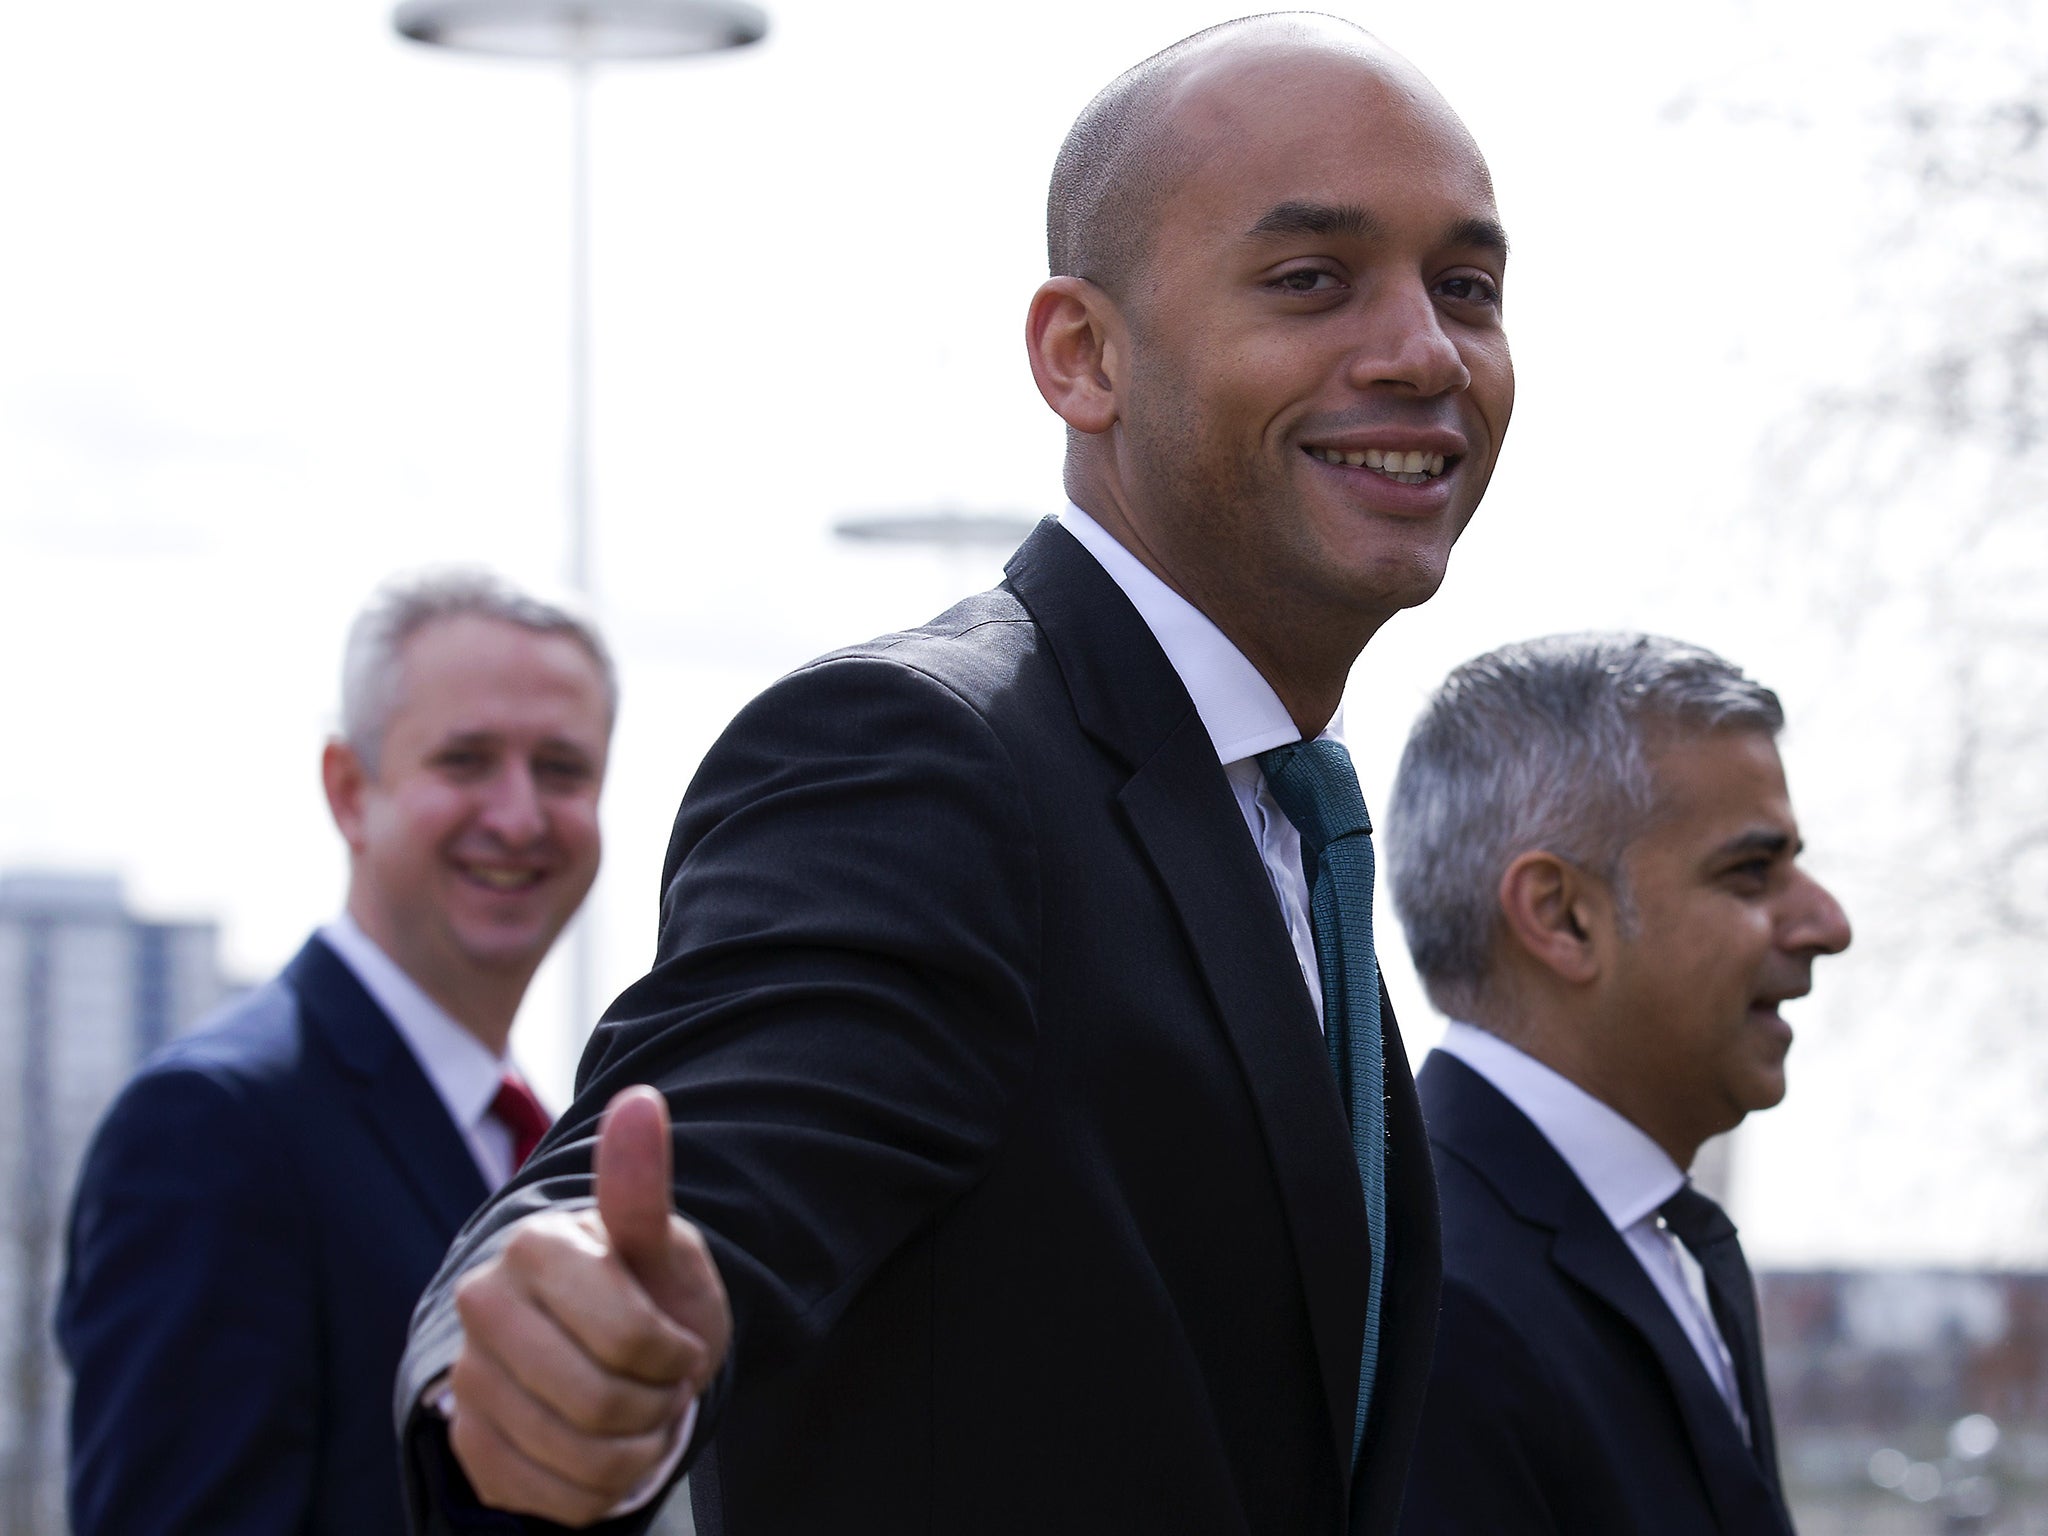 Chuka Umunna said last week that: “We have to accept the result when it comes, and we’ve got to support our new leader in developing an agenda that can return Labour to office.”